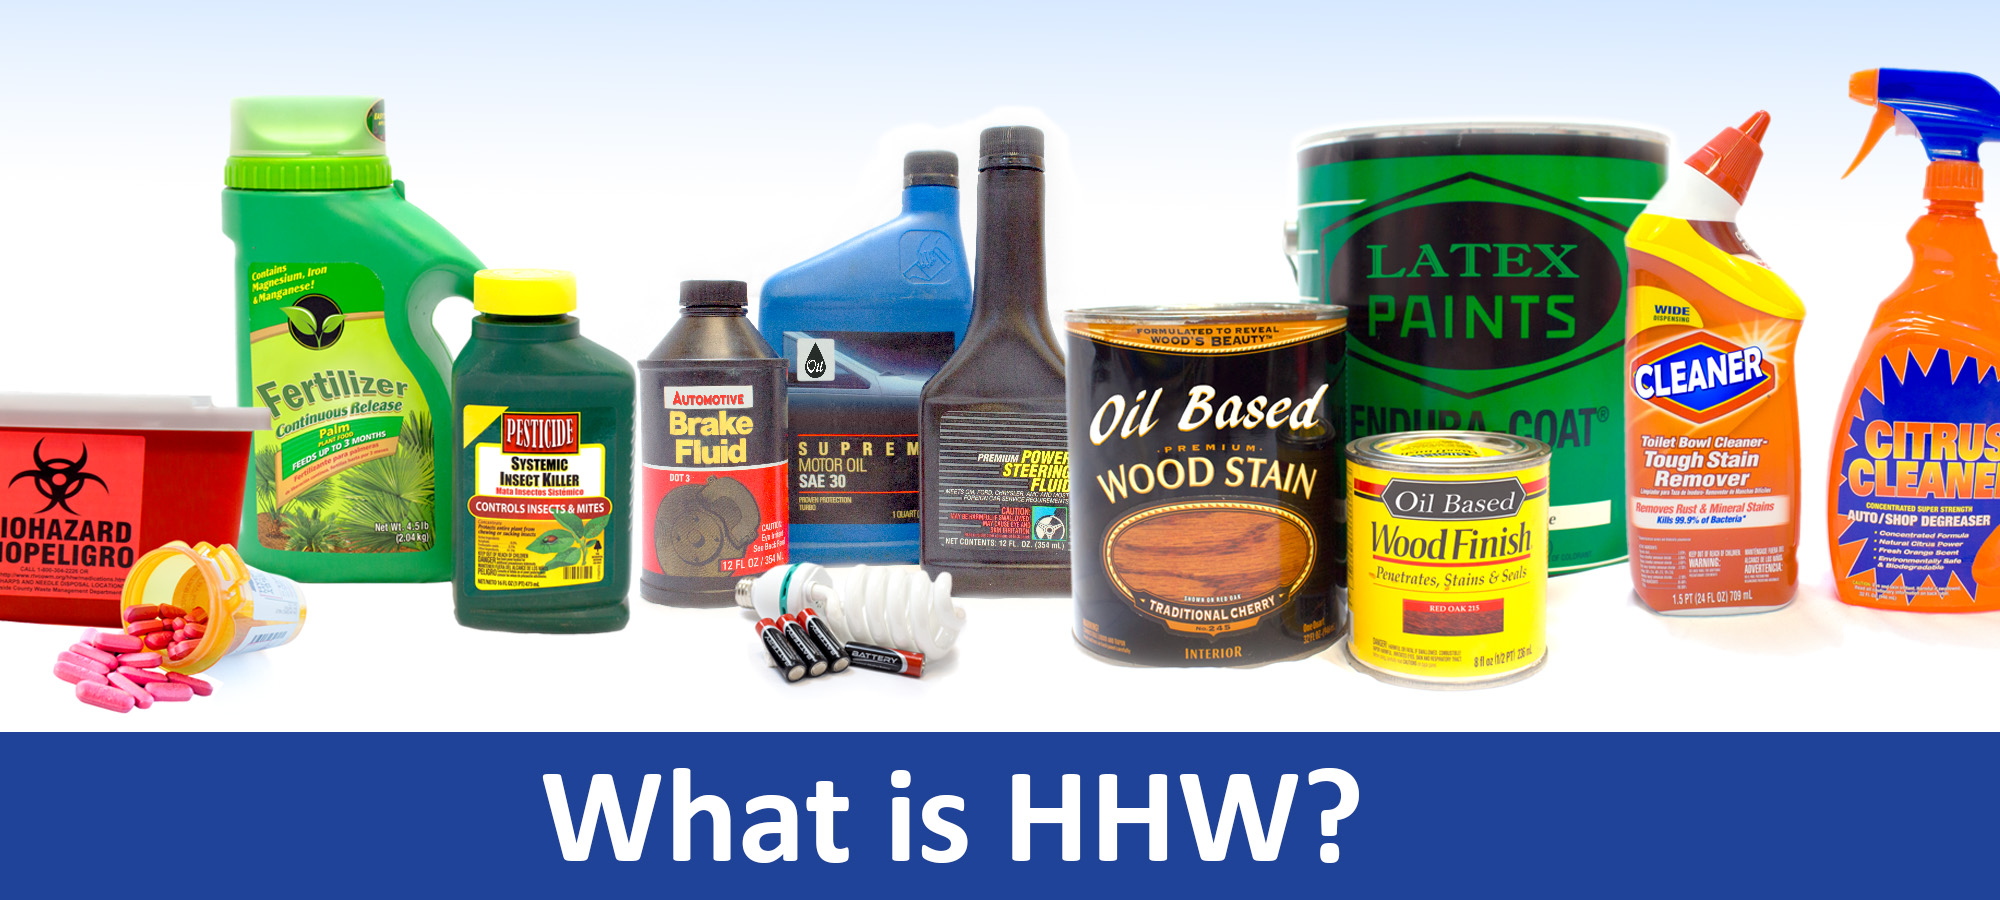 What is HHW?